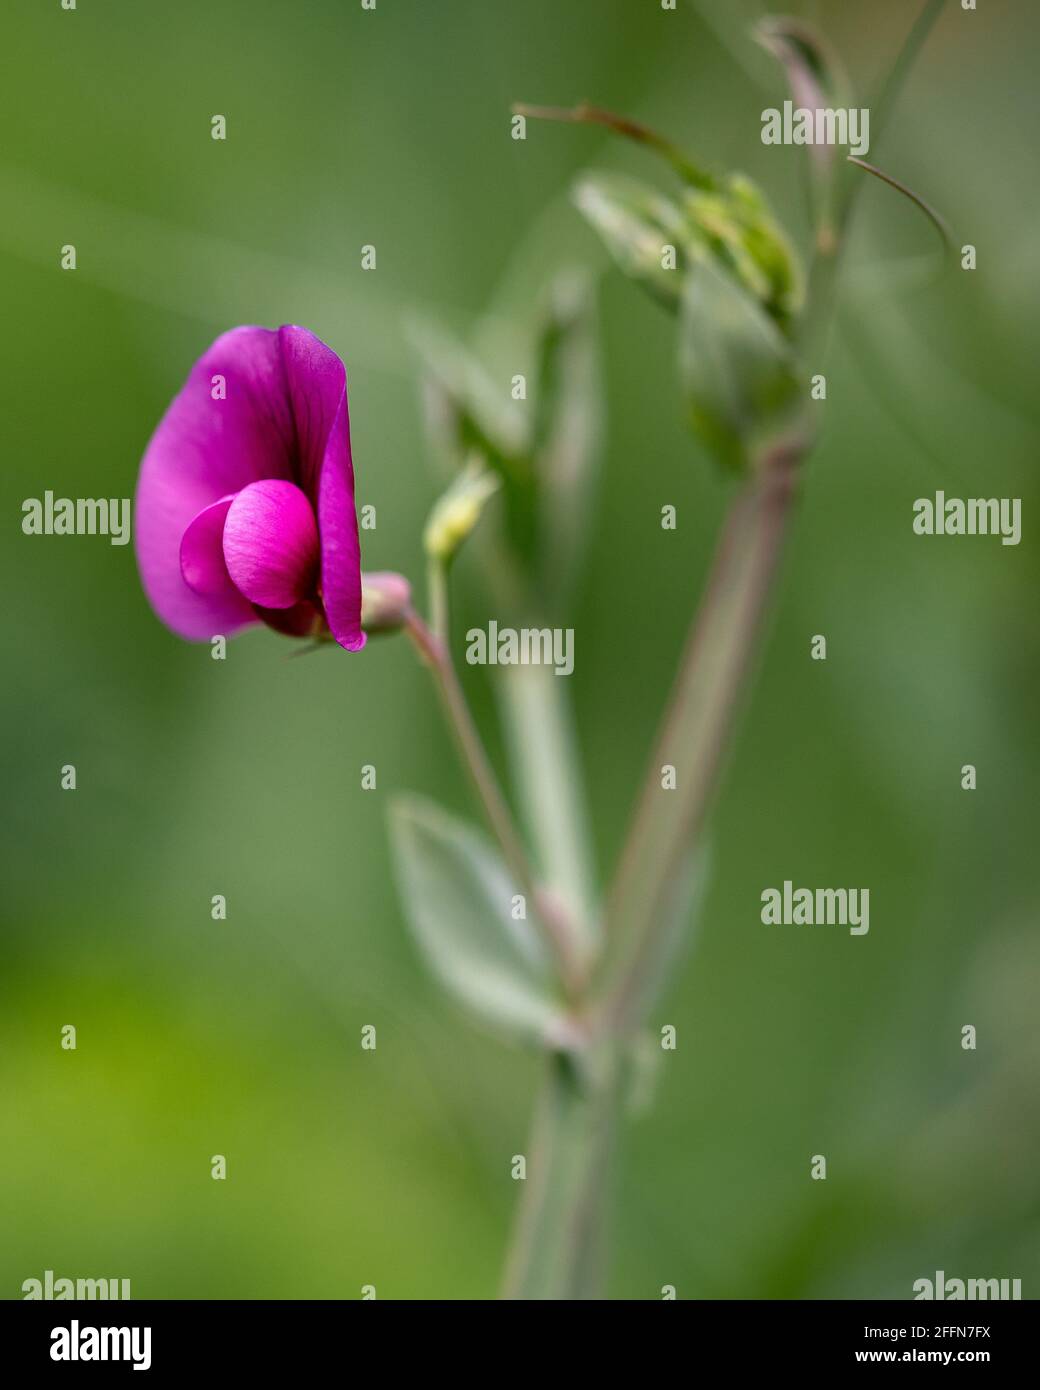 Beautiful Tangier pea flower in the blurred natural background Stock Photo